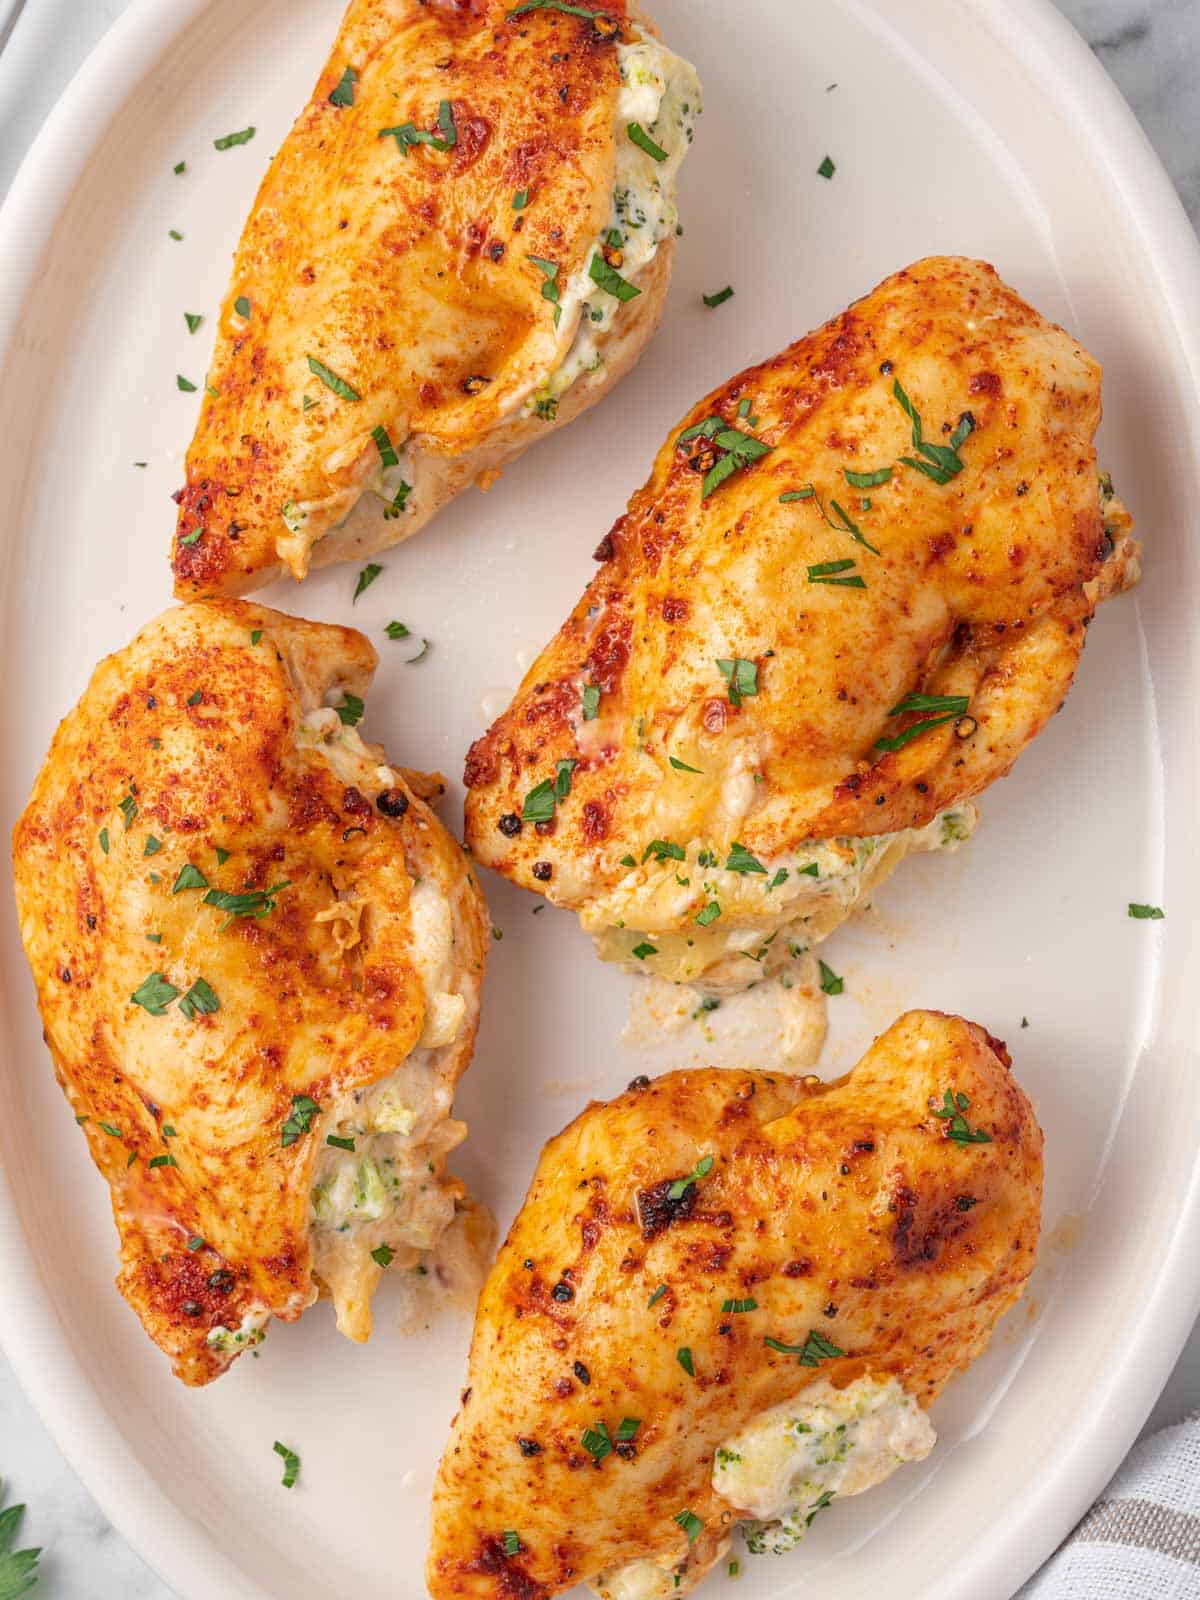 Several pieces of air fryer chicken breast rest on a plate.